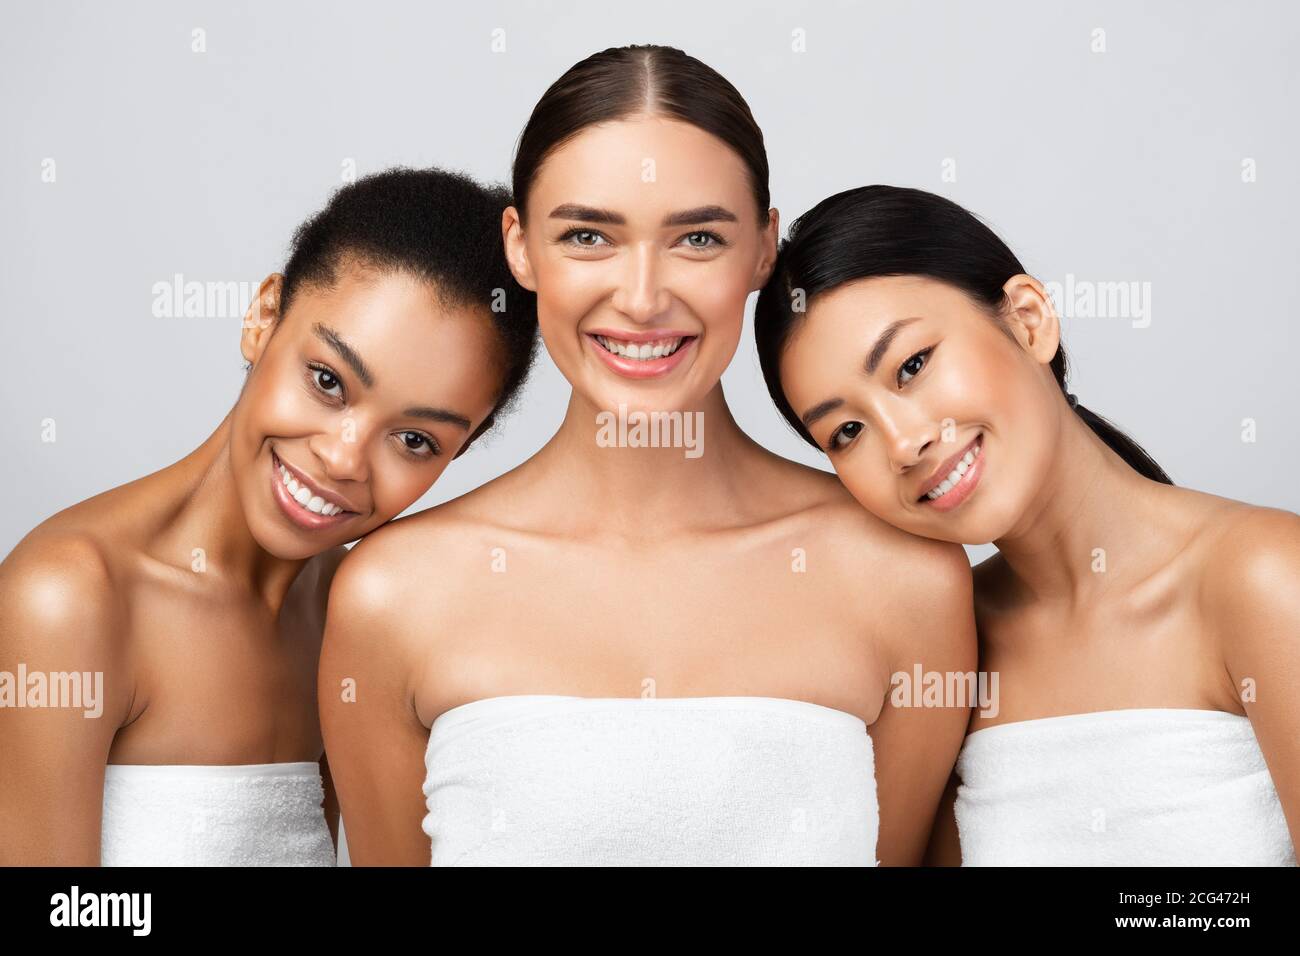 Girls Wrapped In Towels Standing On Gray Background After Shower Stock Photo